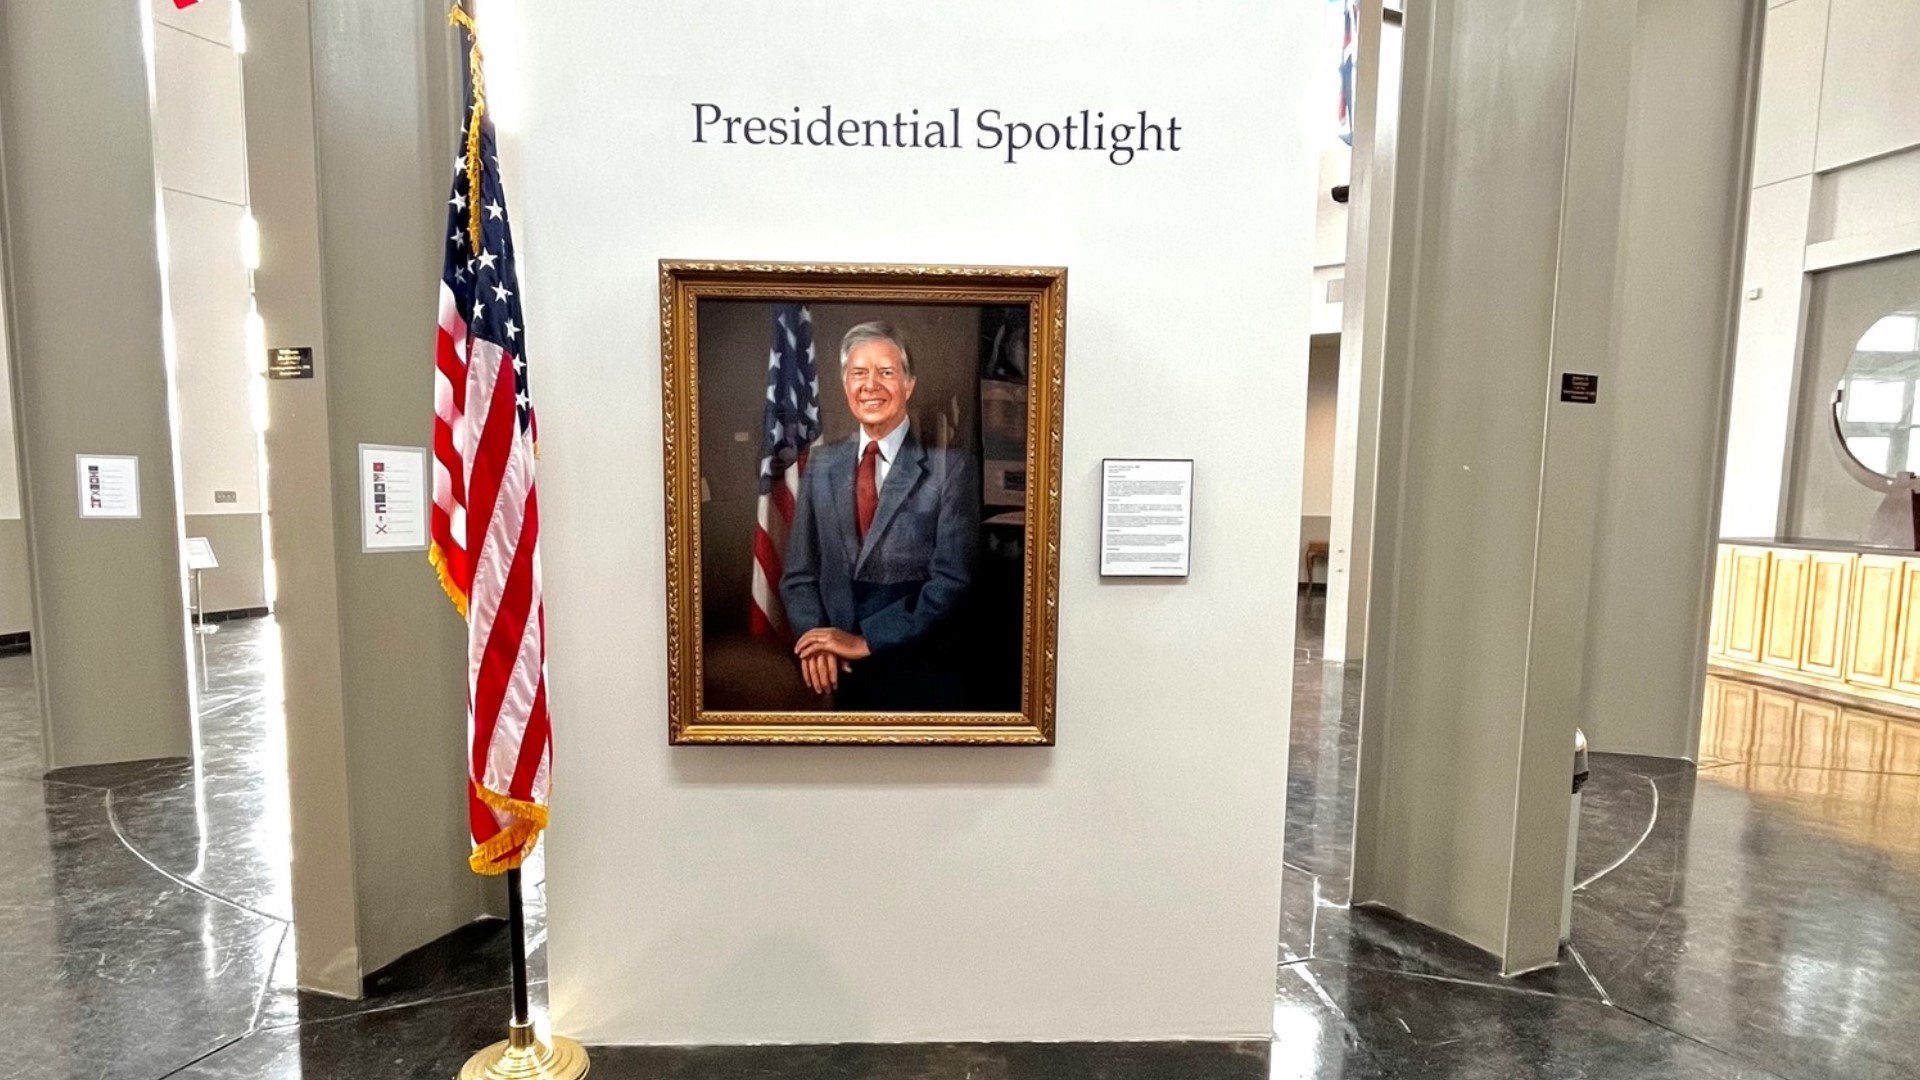 The museum has set up a special display with a portrait of the former president.